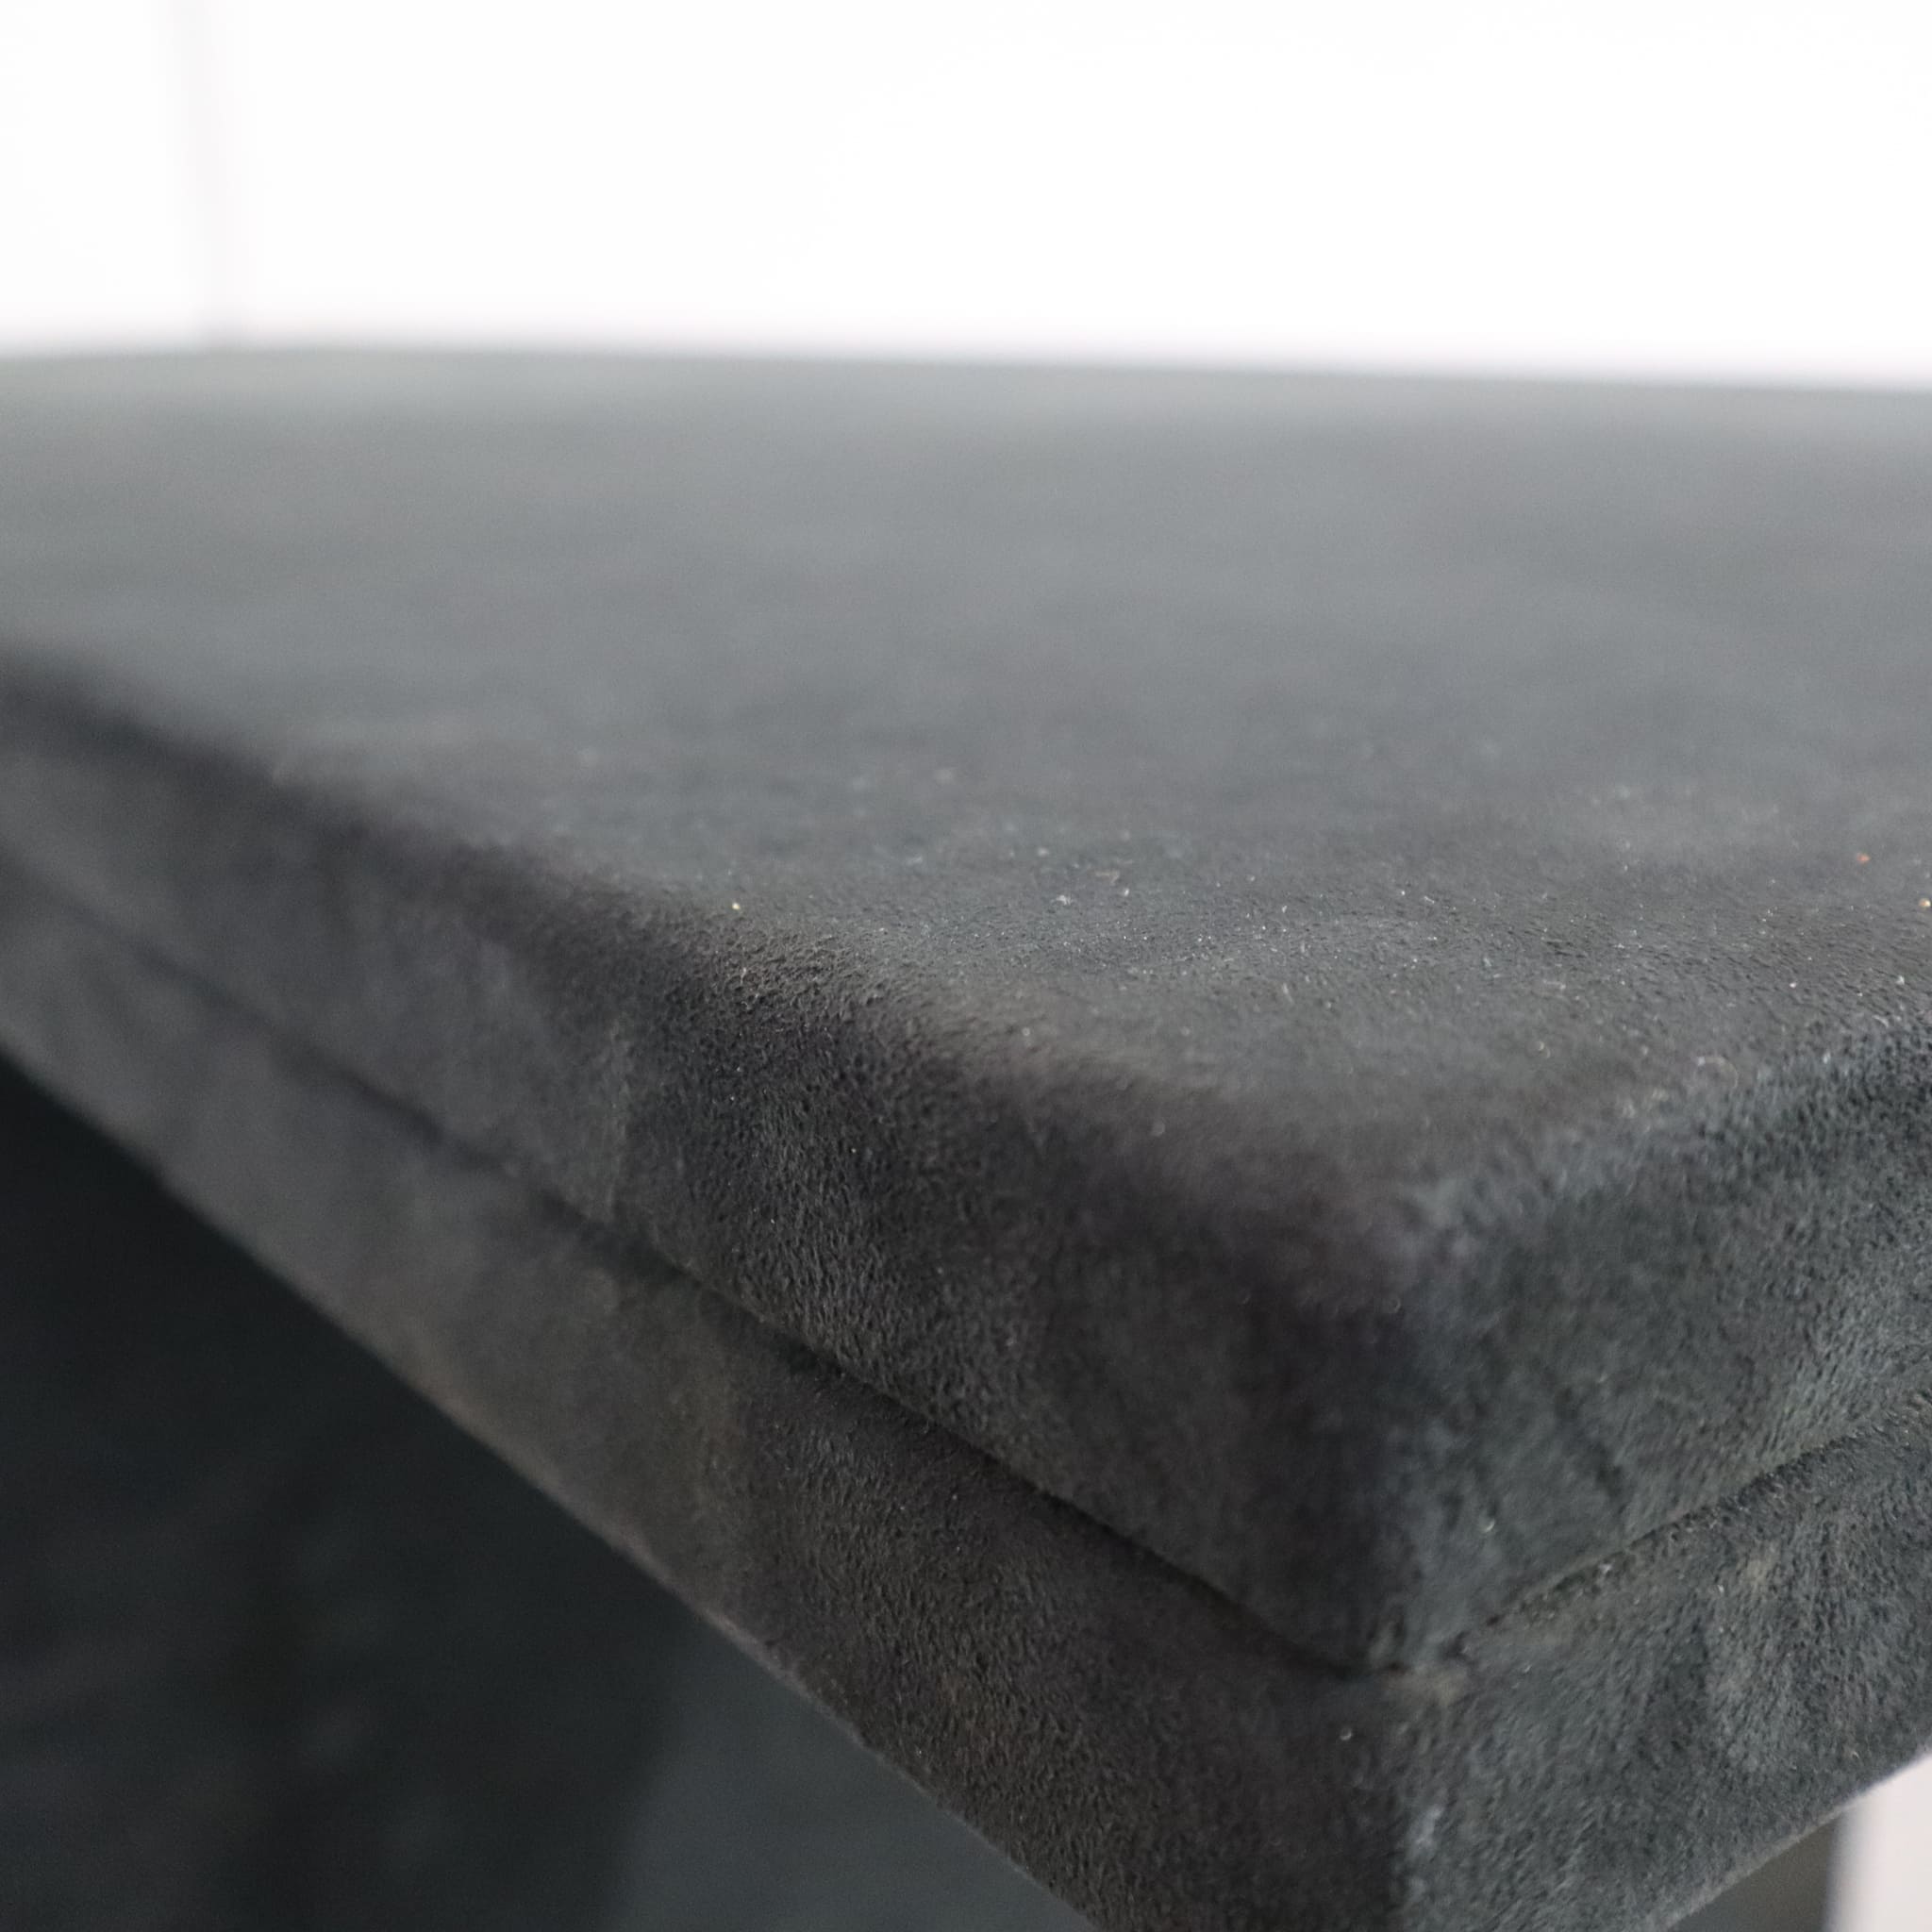 visionidepoca-modern-design-table-orseolo-by-carlo-scarpa-for-simon-gavina-all-in-velvet-70s-fabric-detail